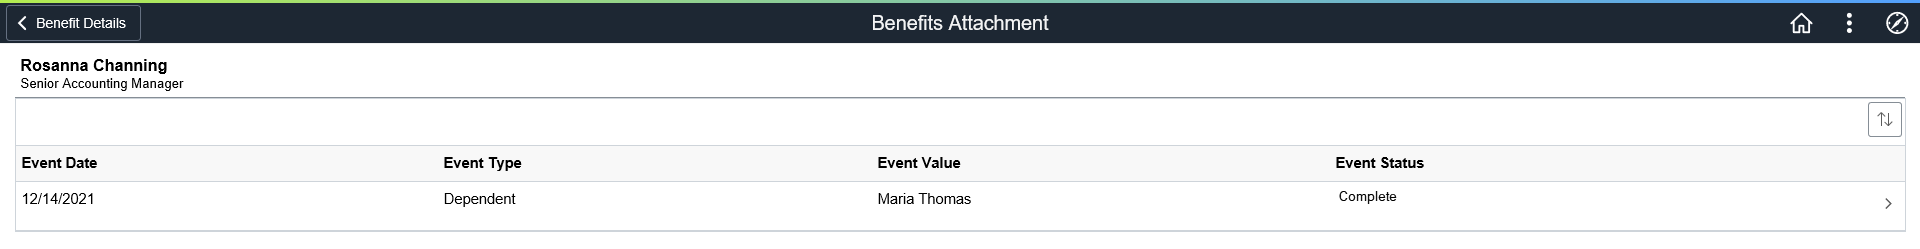 Benefits Attachment page